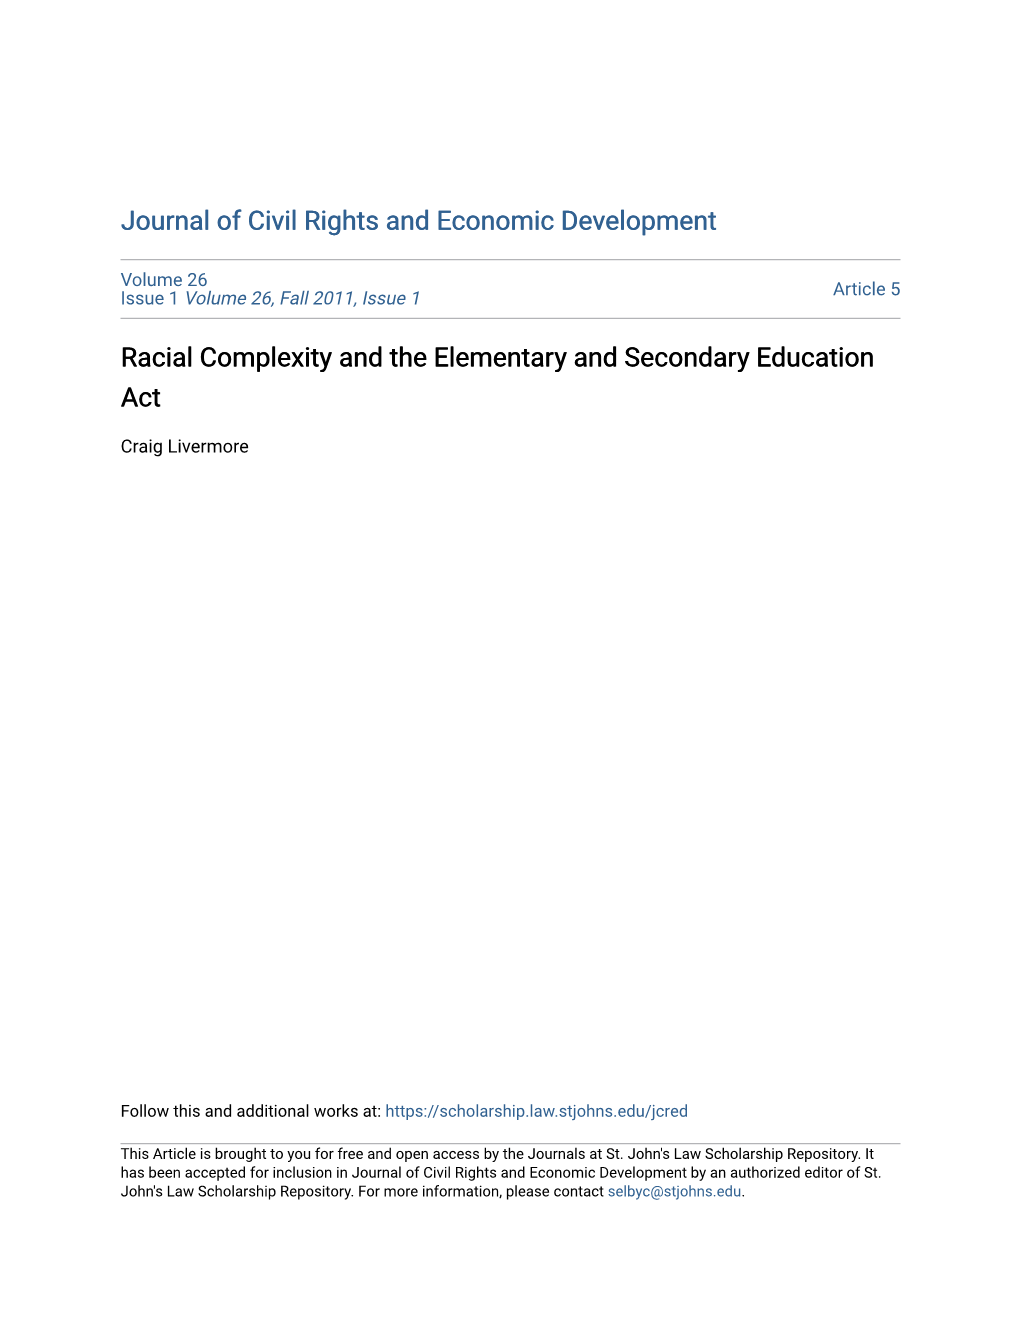 Racial Complexity and the Elementary and Secondary Education Act